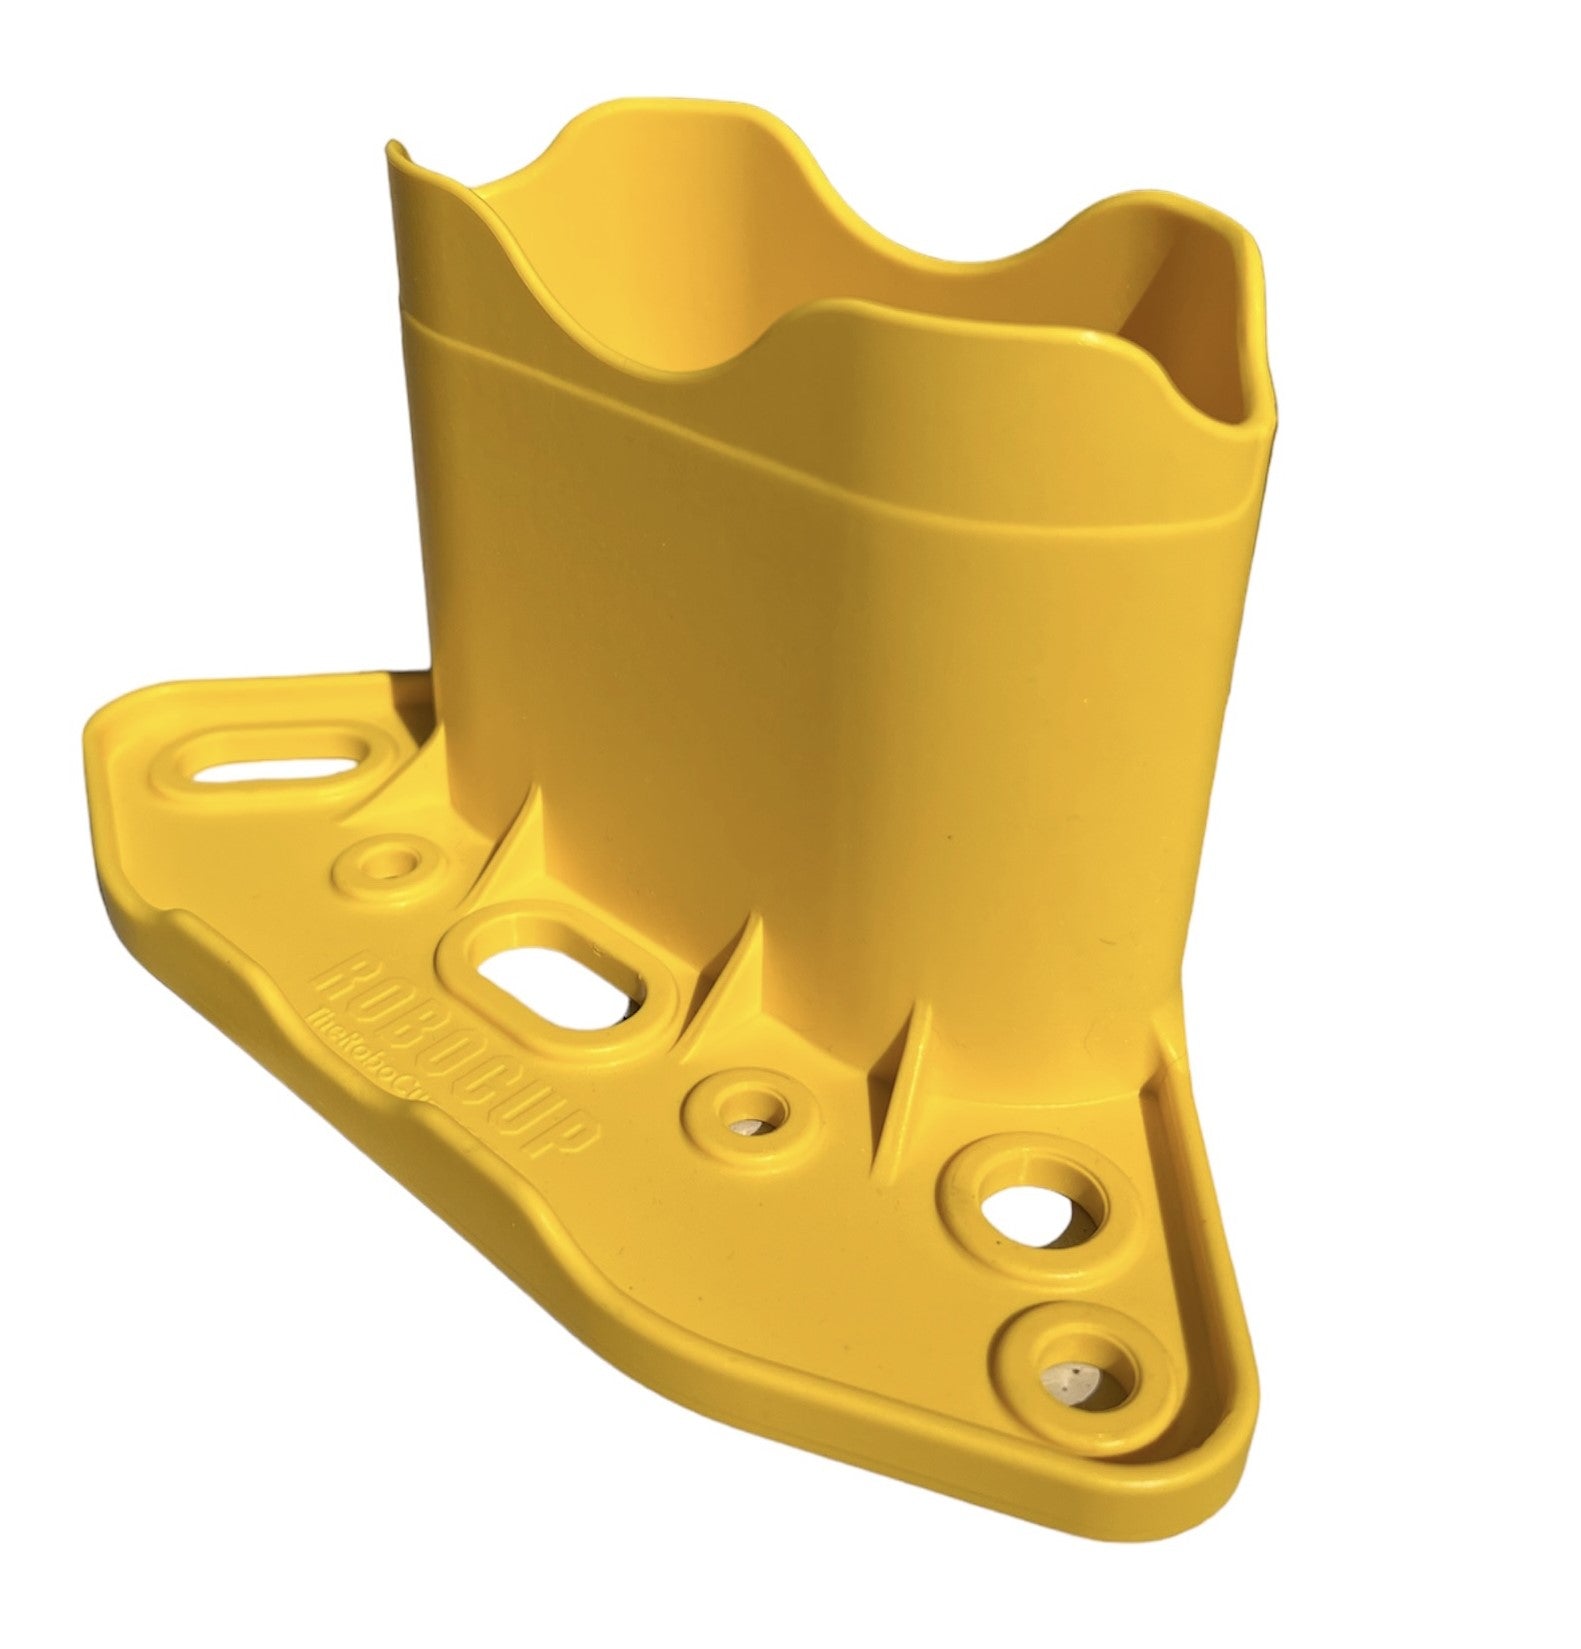 Yellow RoboCup Holster is now available and is Made in the USA